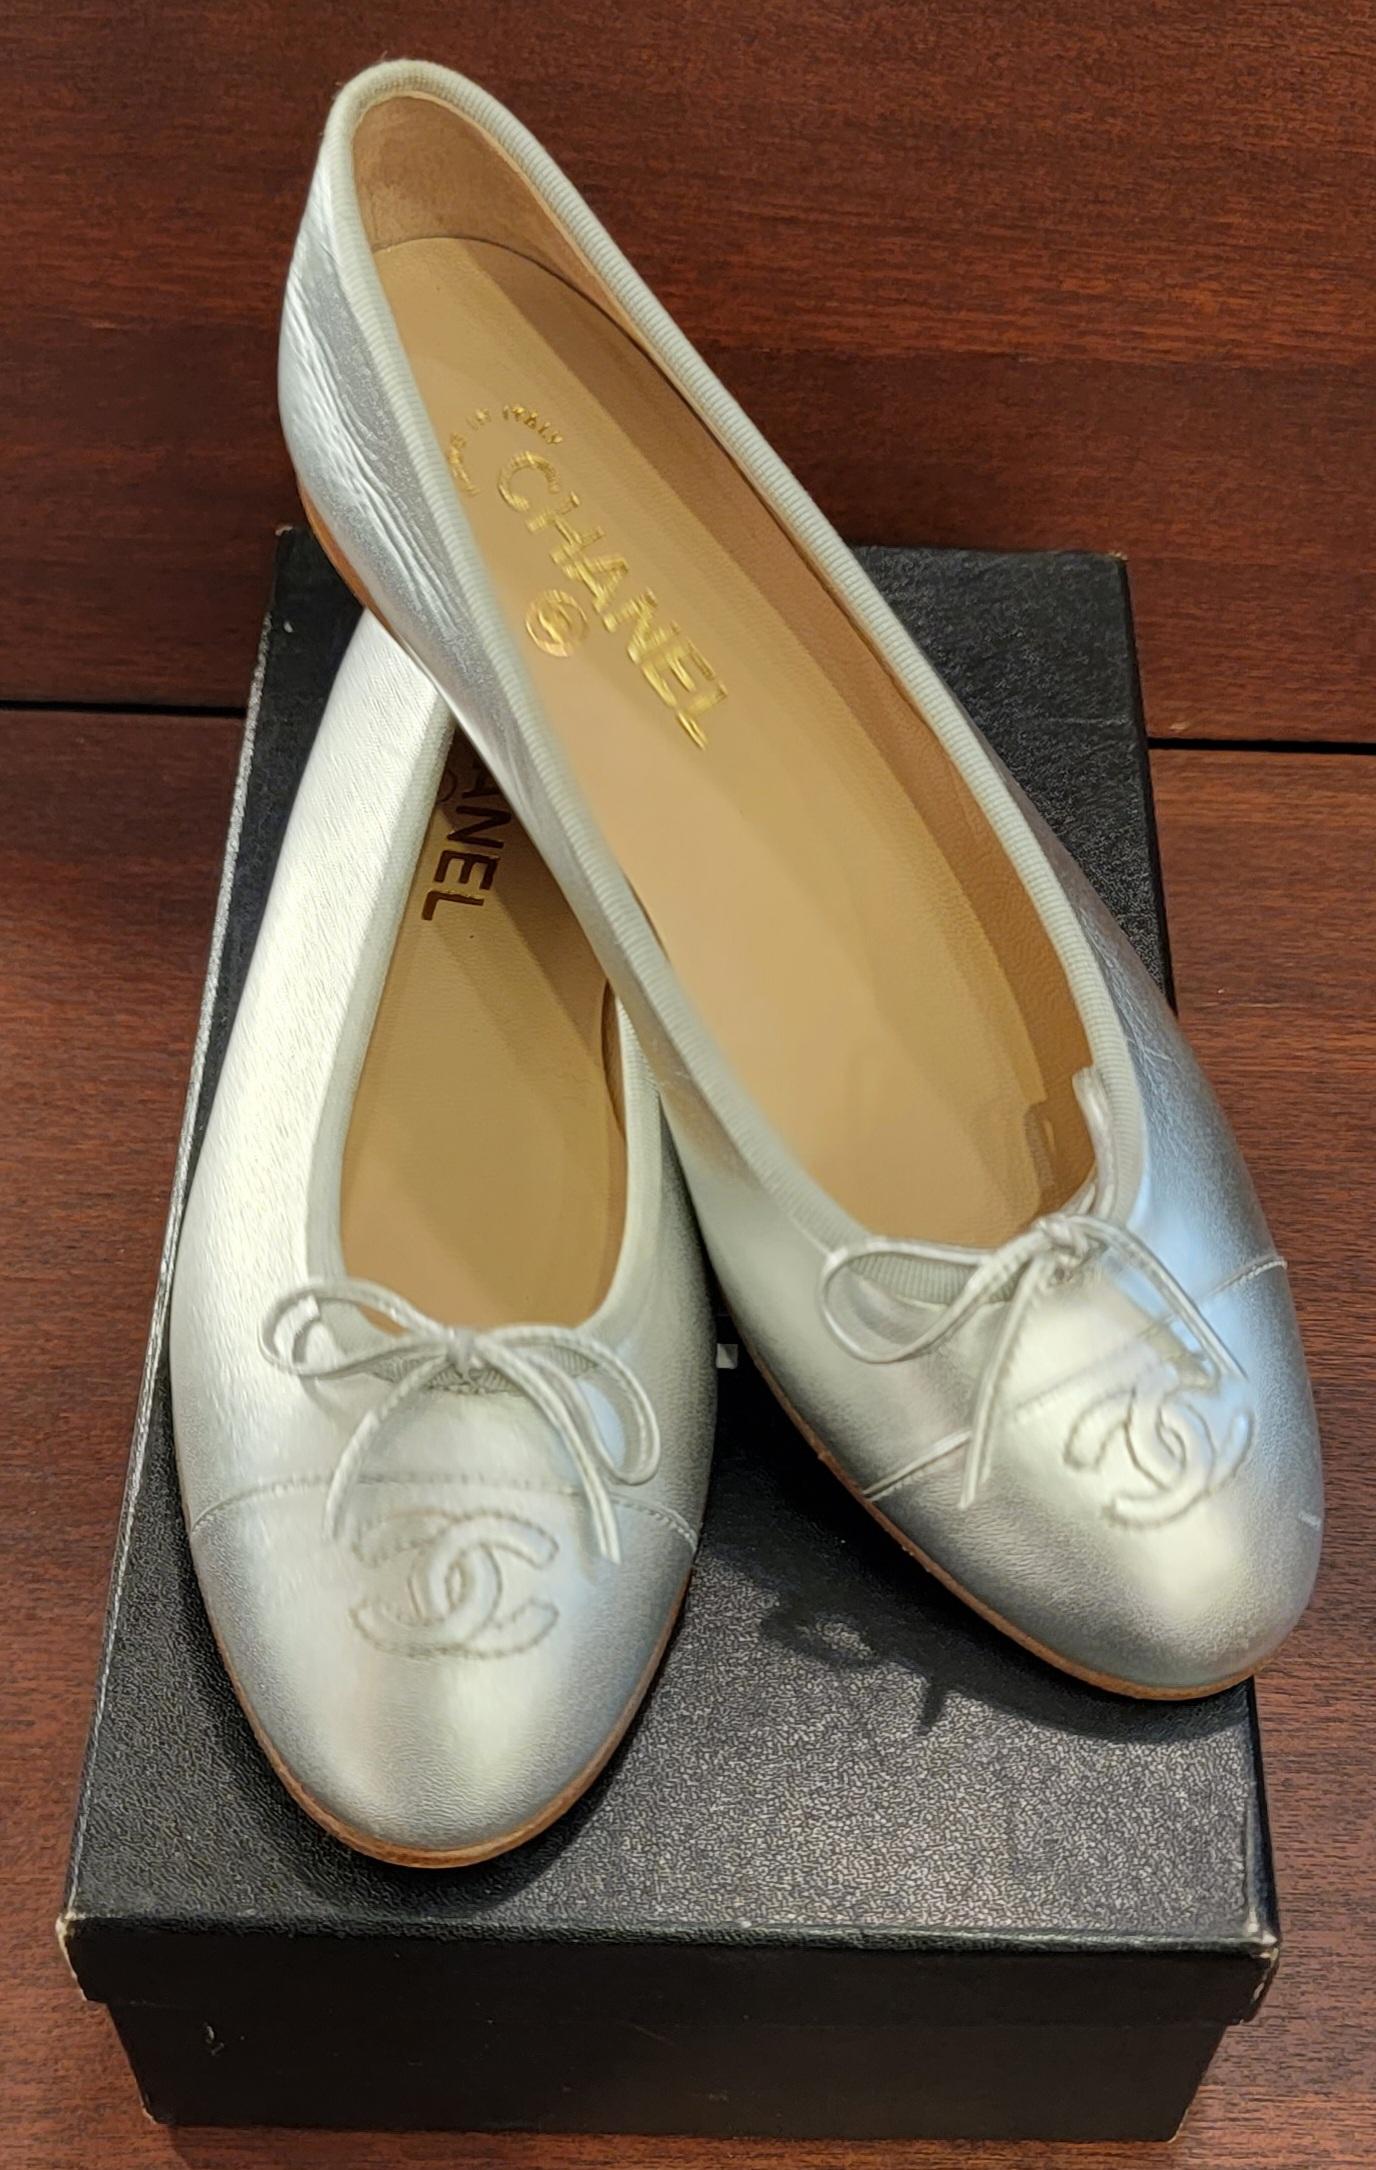 Rare Brande New Chanel Ballerina Metallic Silver Shoes. Wondderful Bow tie accents in the front with the metallic Double CC underneath. The sole is a beautiful tan sole that accentuates the silver metallic frame of the shoes.
Size 39